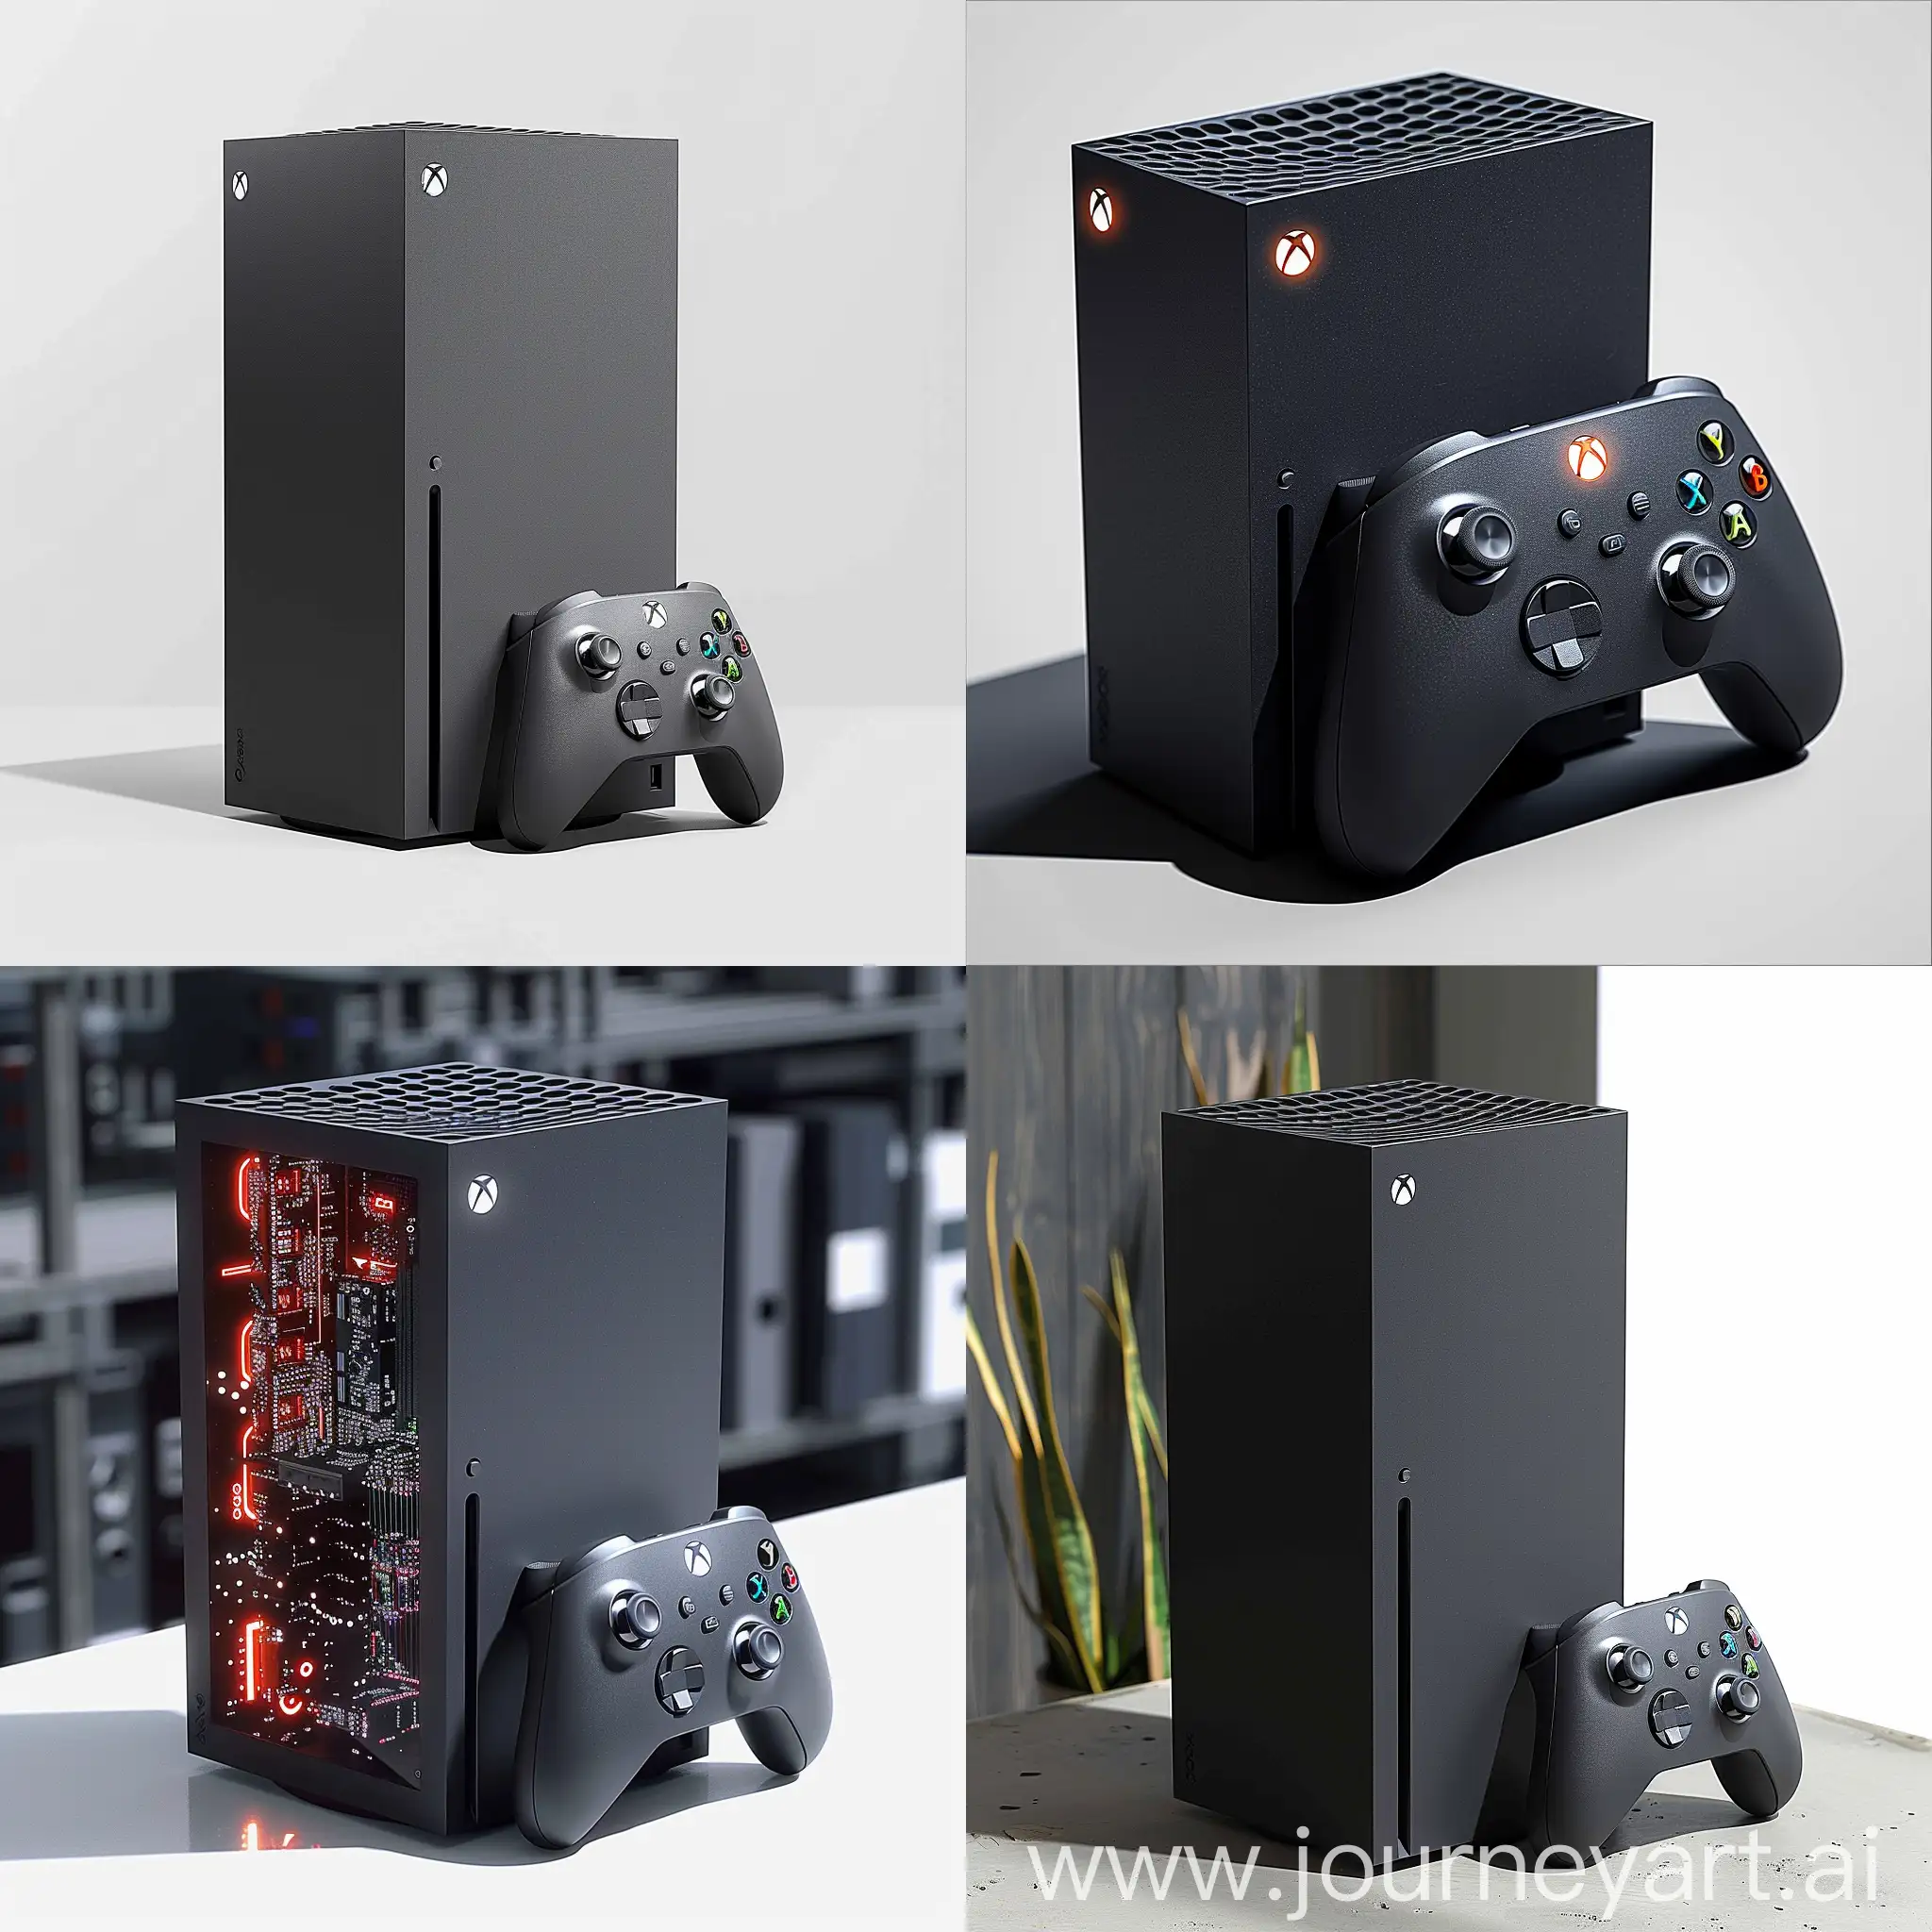 Futuristic-Xbox-Series-X-SciFi-Style-Console-for-4K-Gaming-and-Fast-Loading-Times